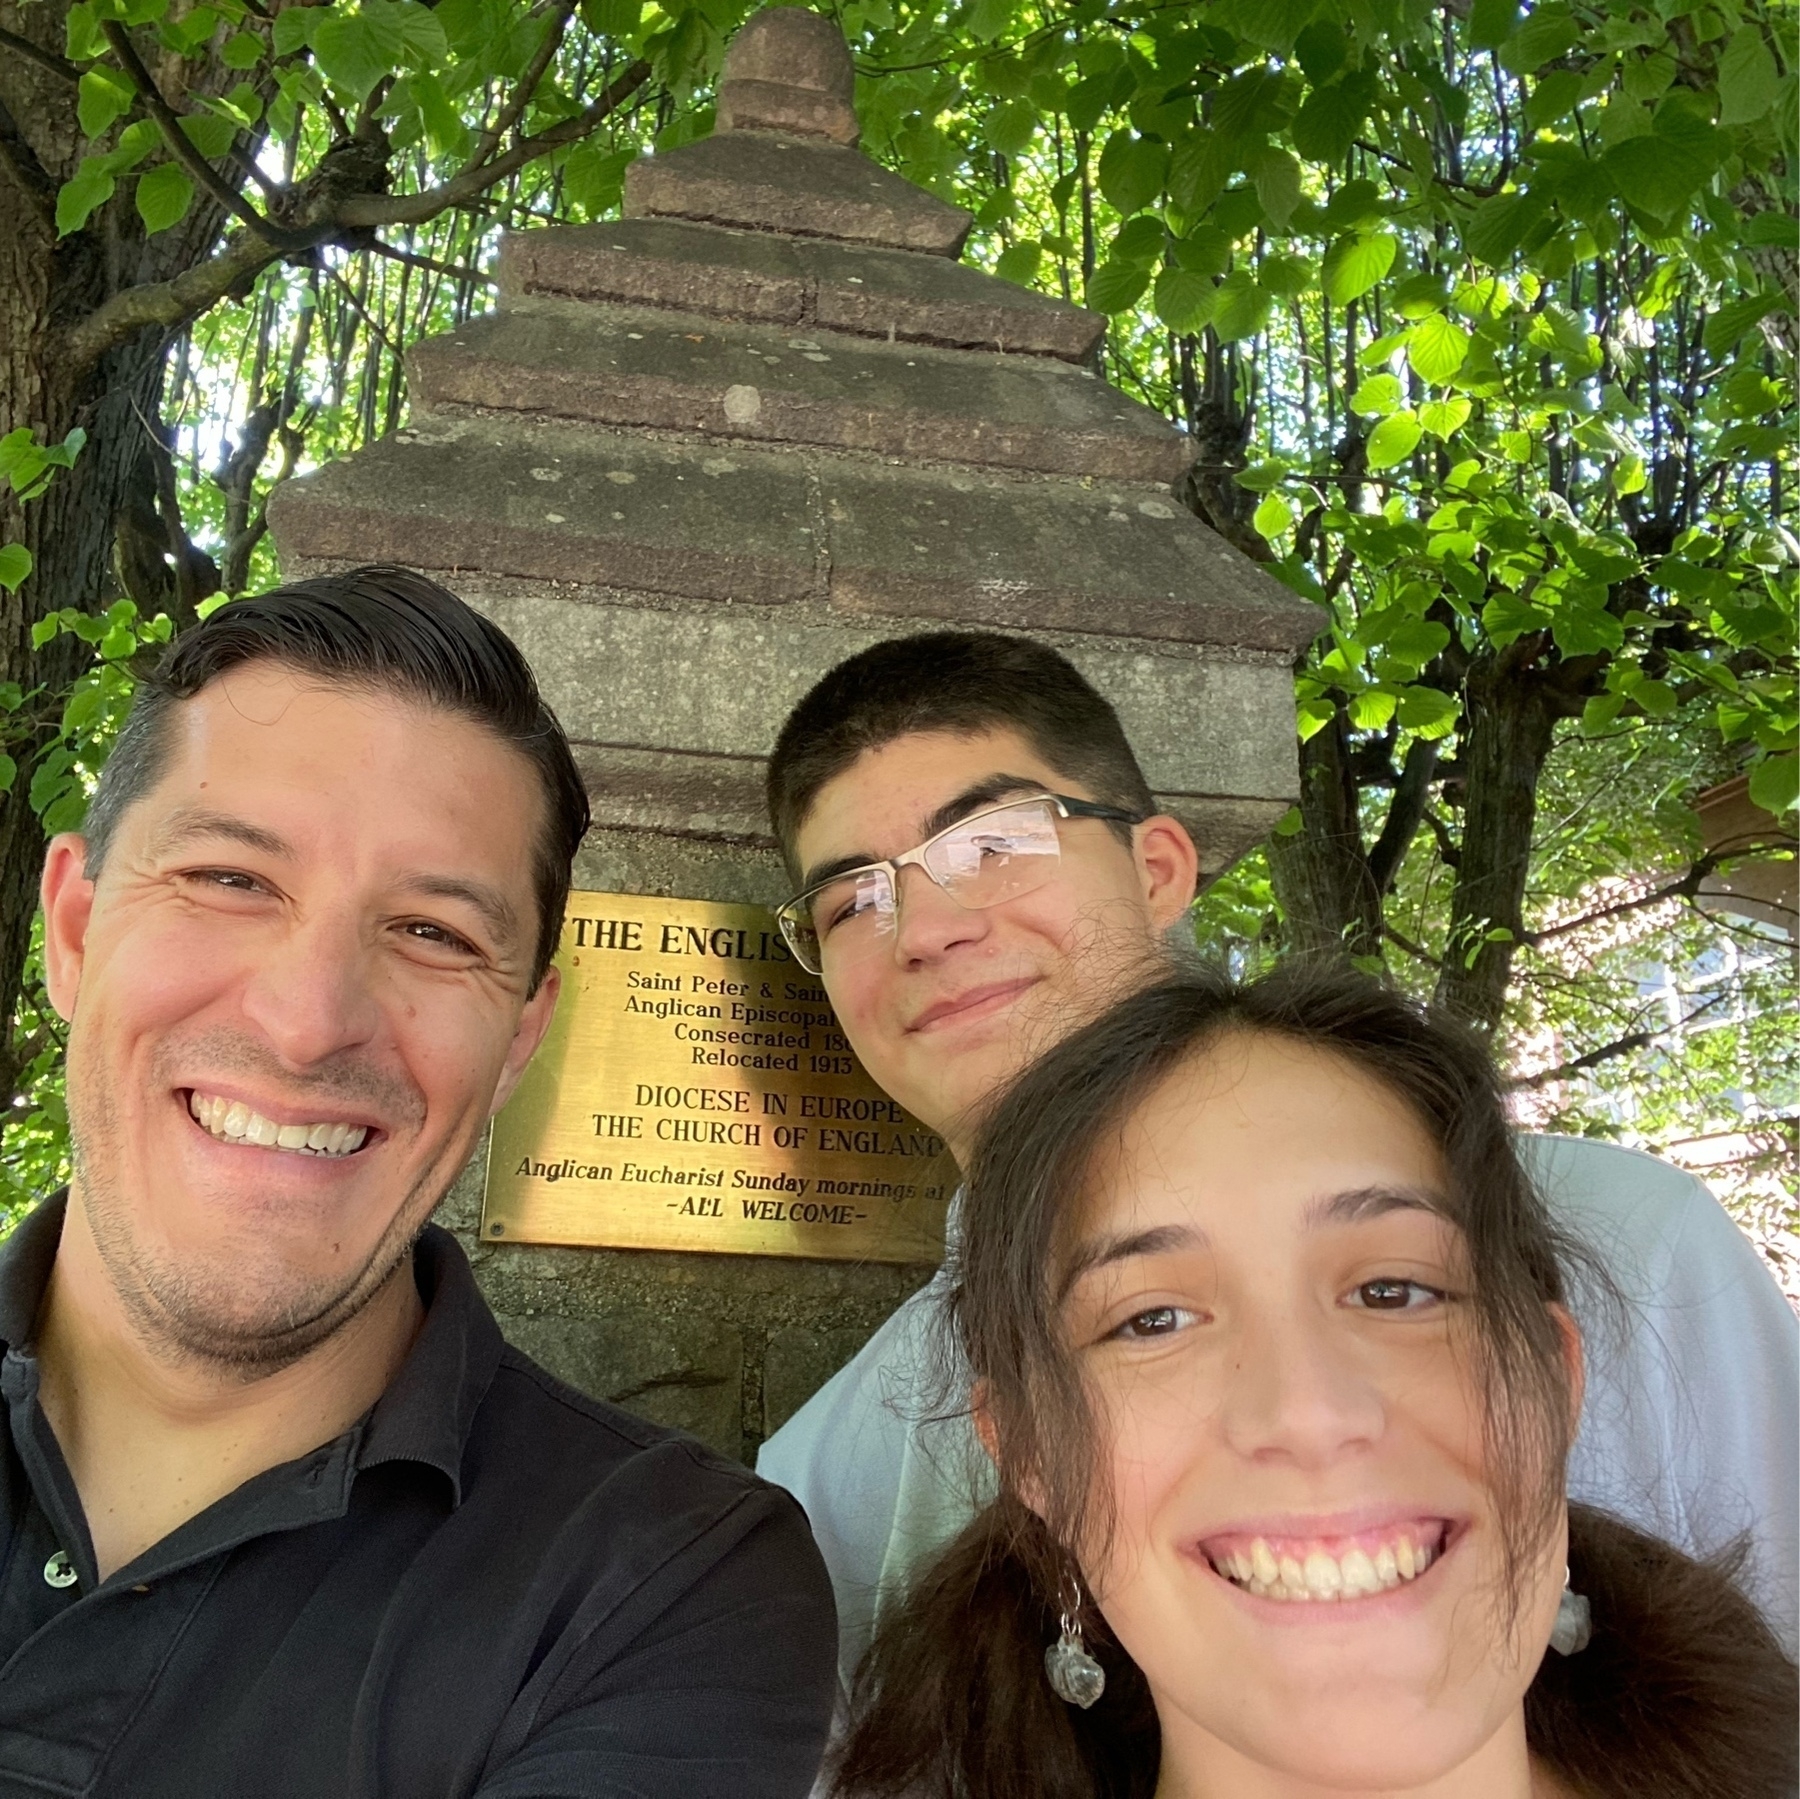 family selfie in front of church plaque